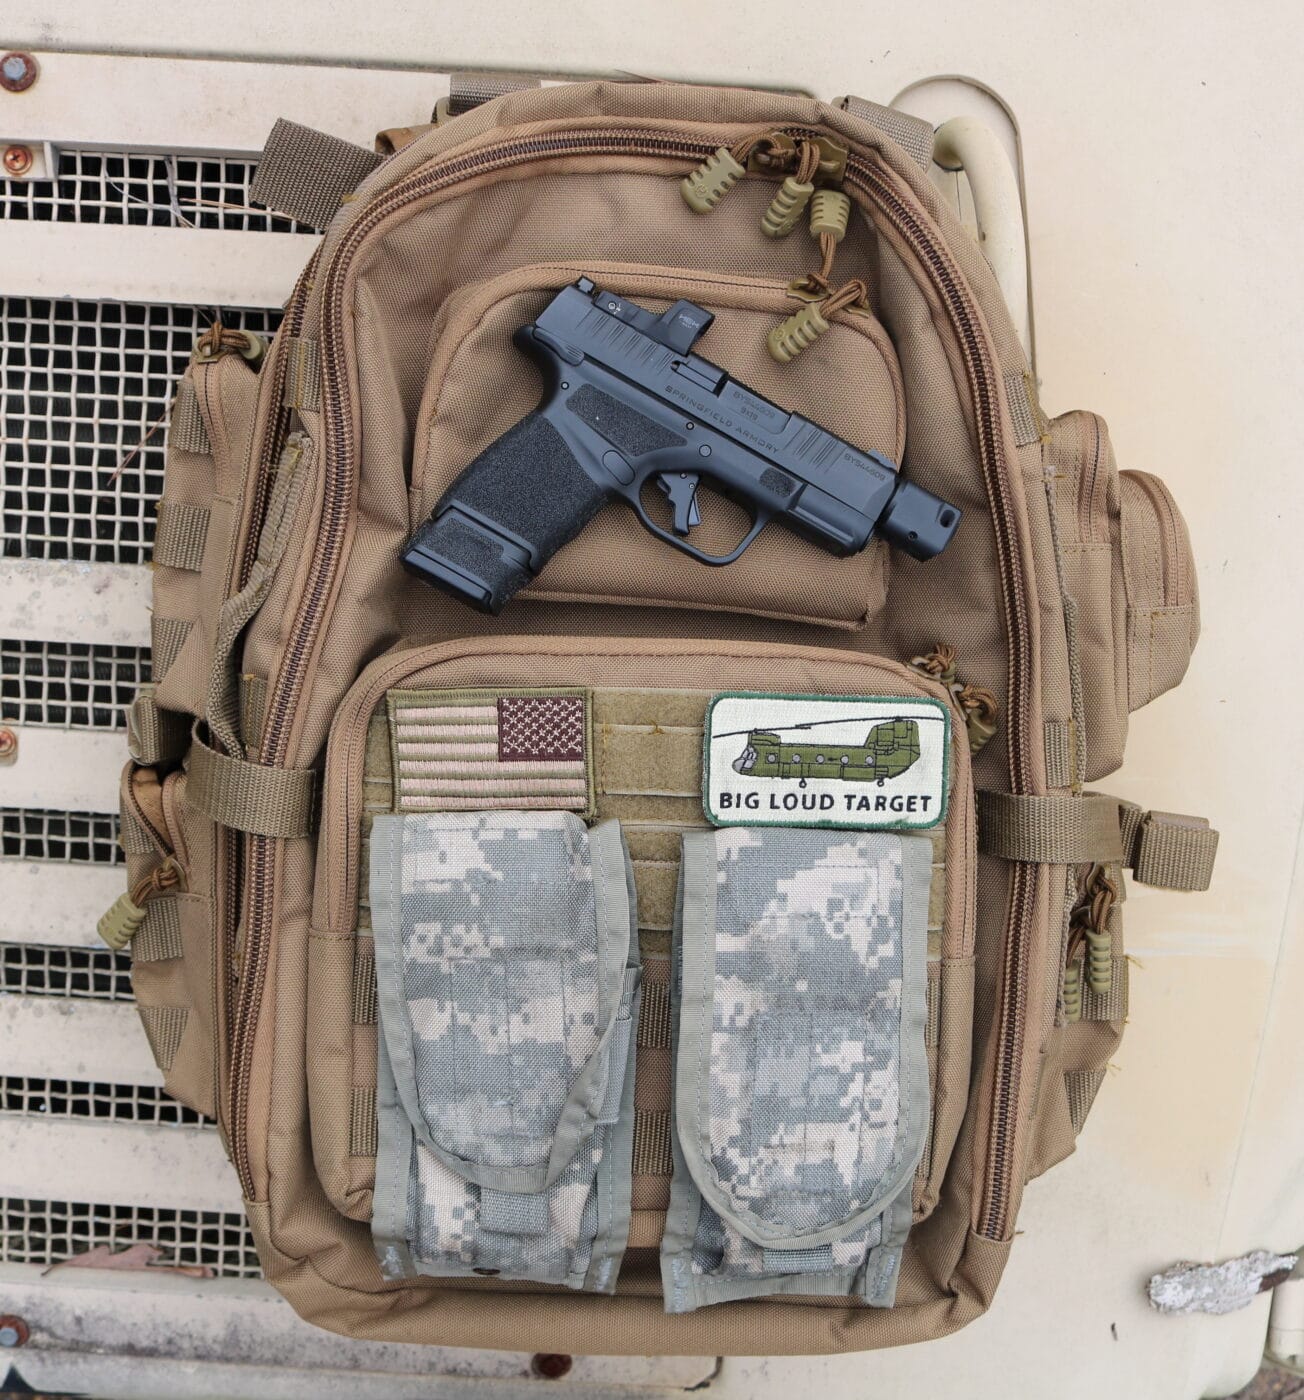 MOLLE on tactical backpack